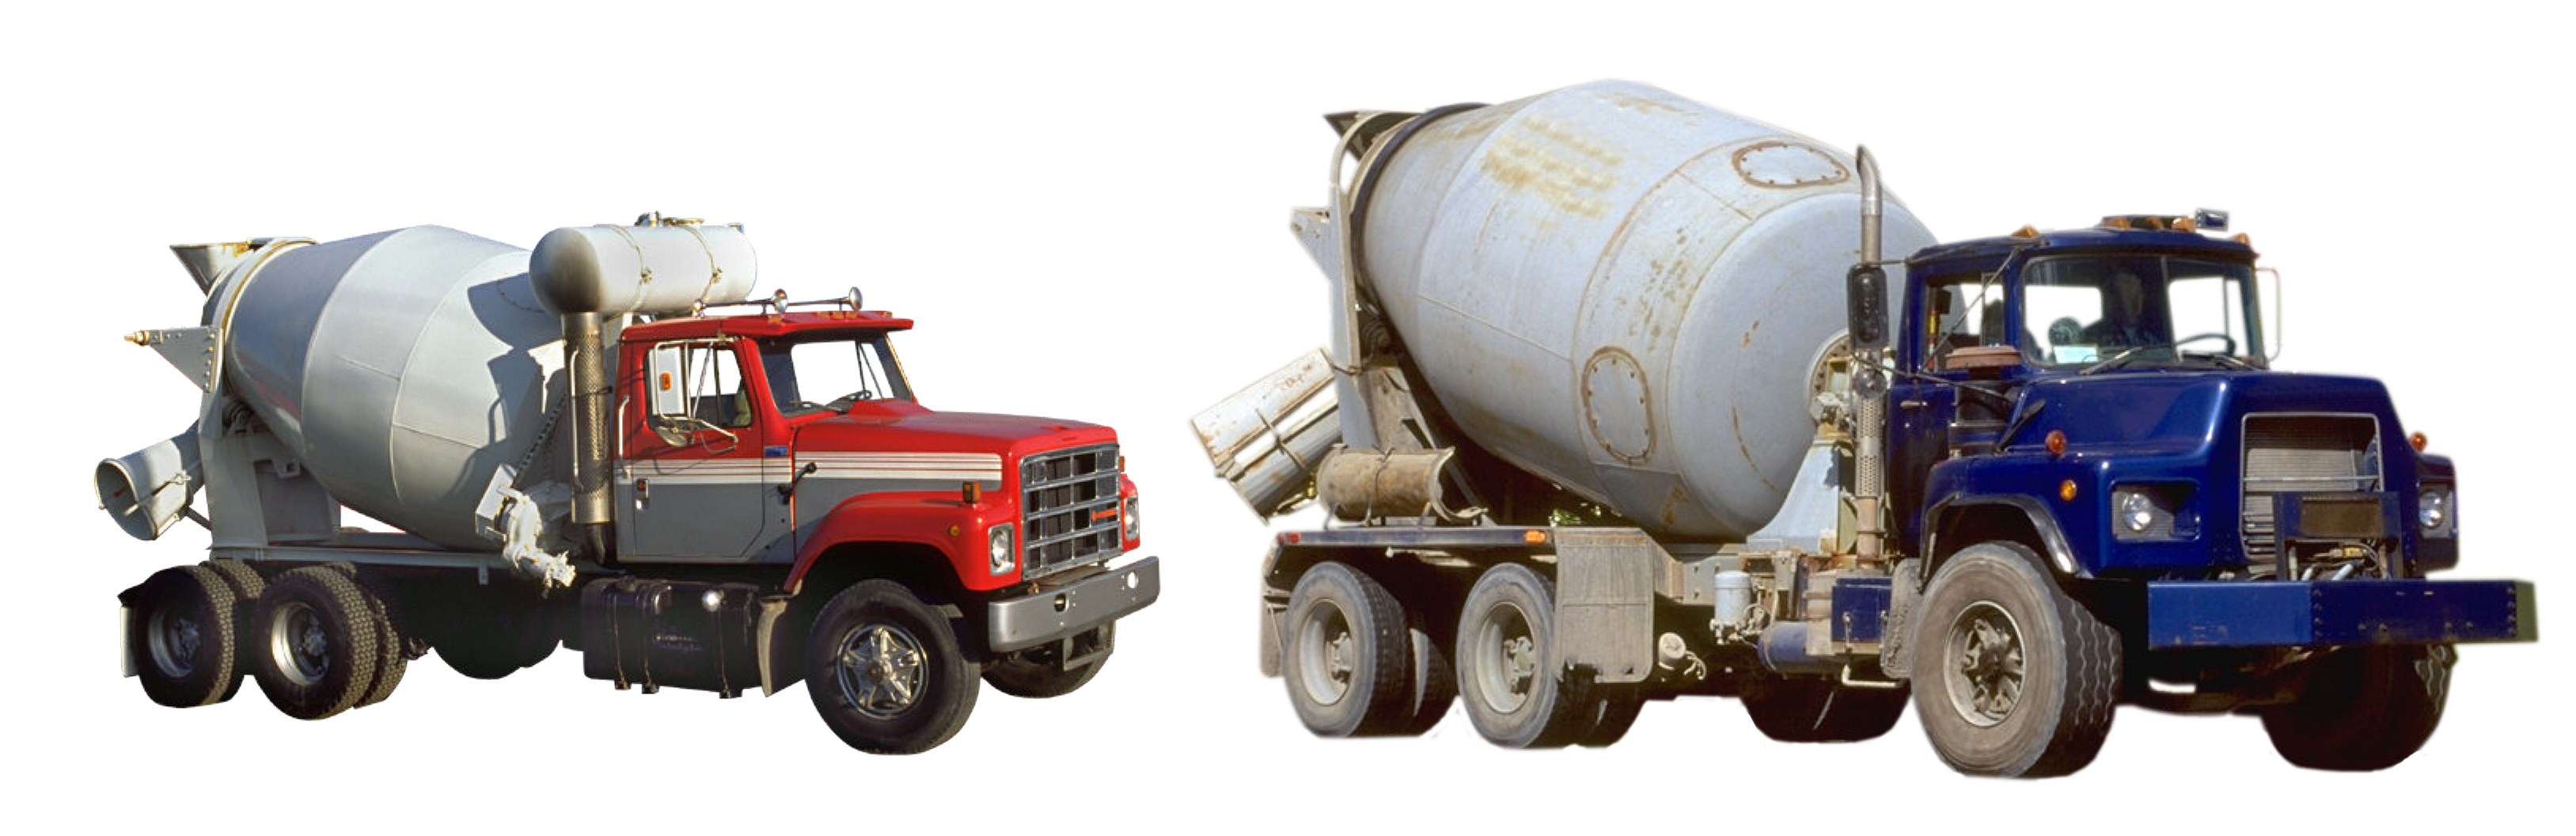 Free photo: Cement Carrier - Carrier, Cement, Transport - Free Download